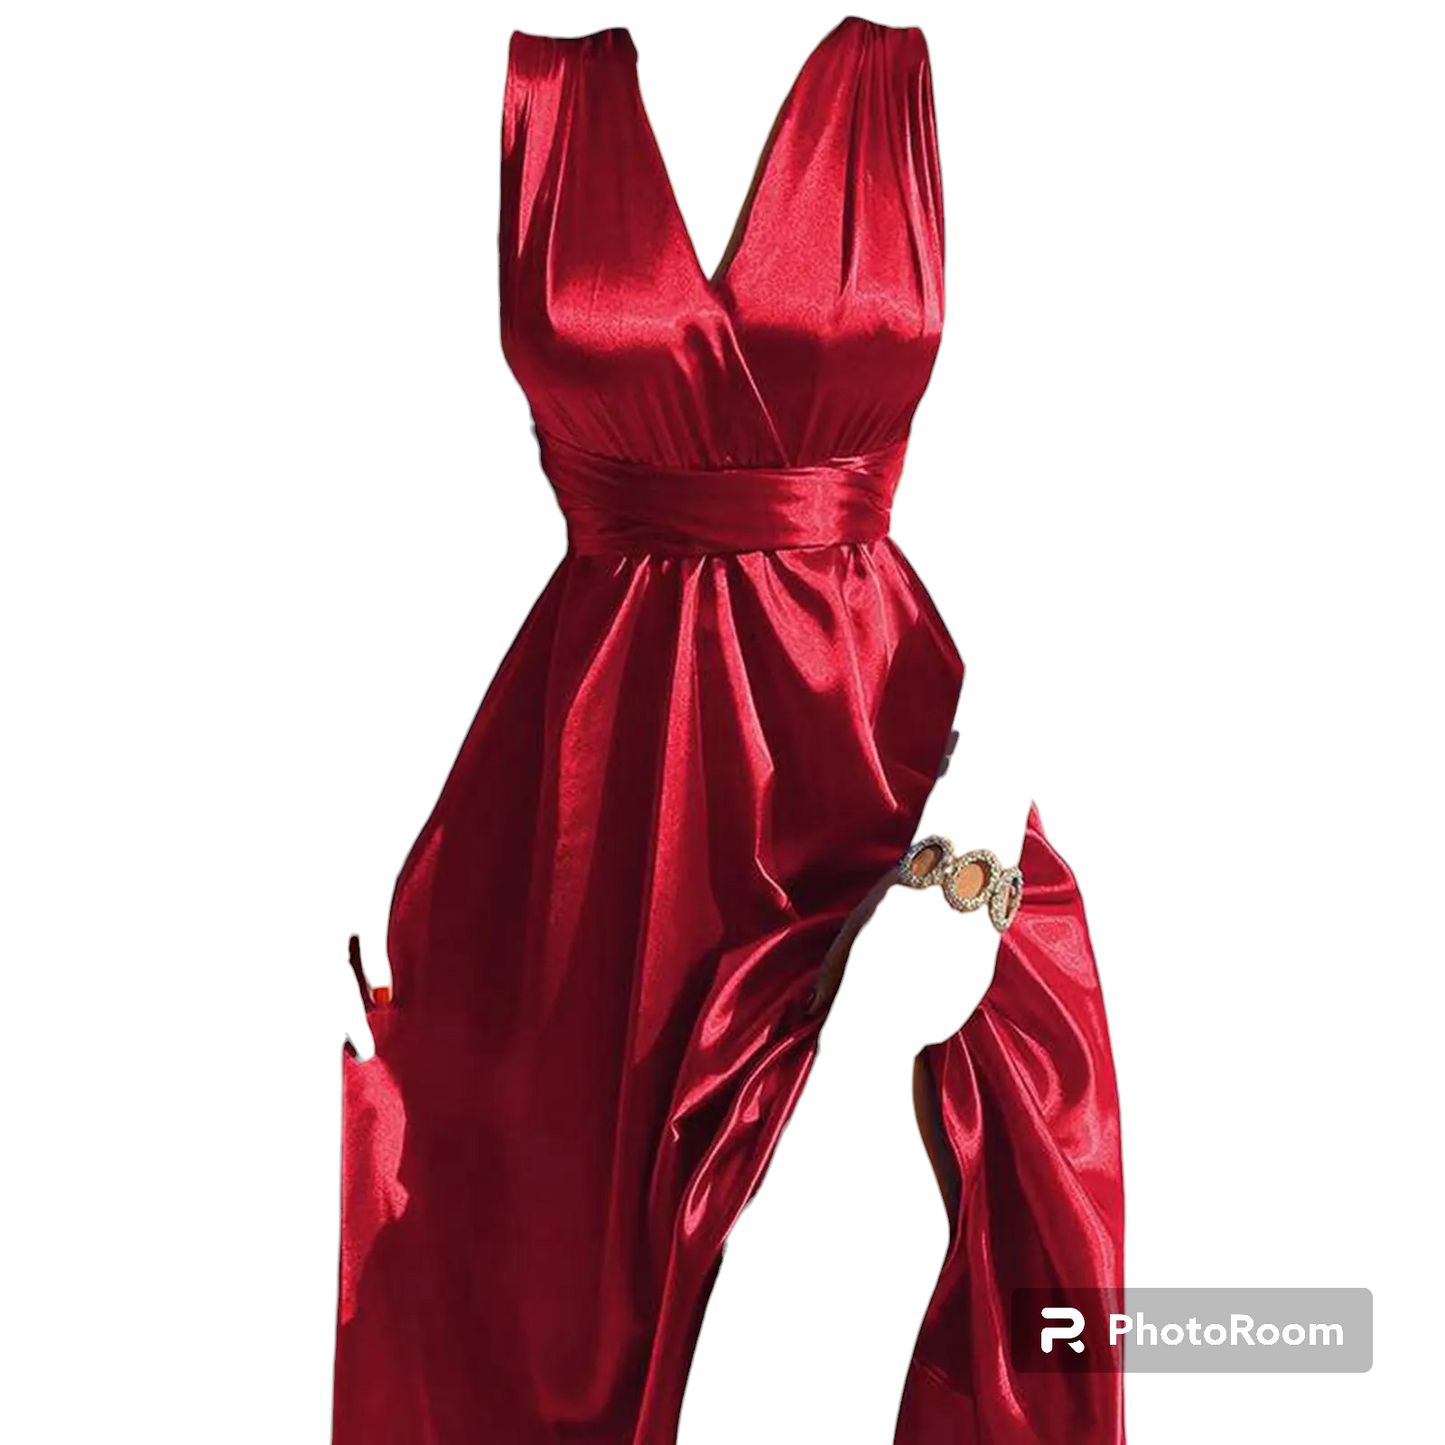 Satin Prom Dress Women Long Elegant Mint Red Solid Backless Sleeveless Spring Summer A-Line Maxi Evening Party Gown Vestidos